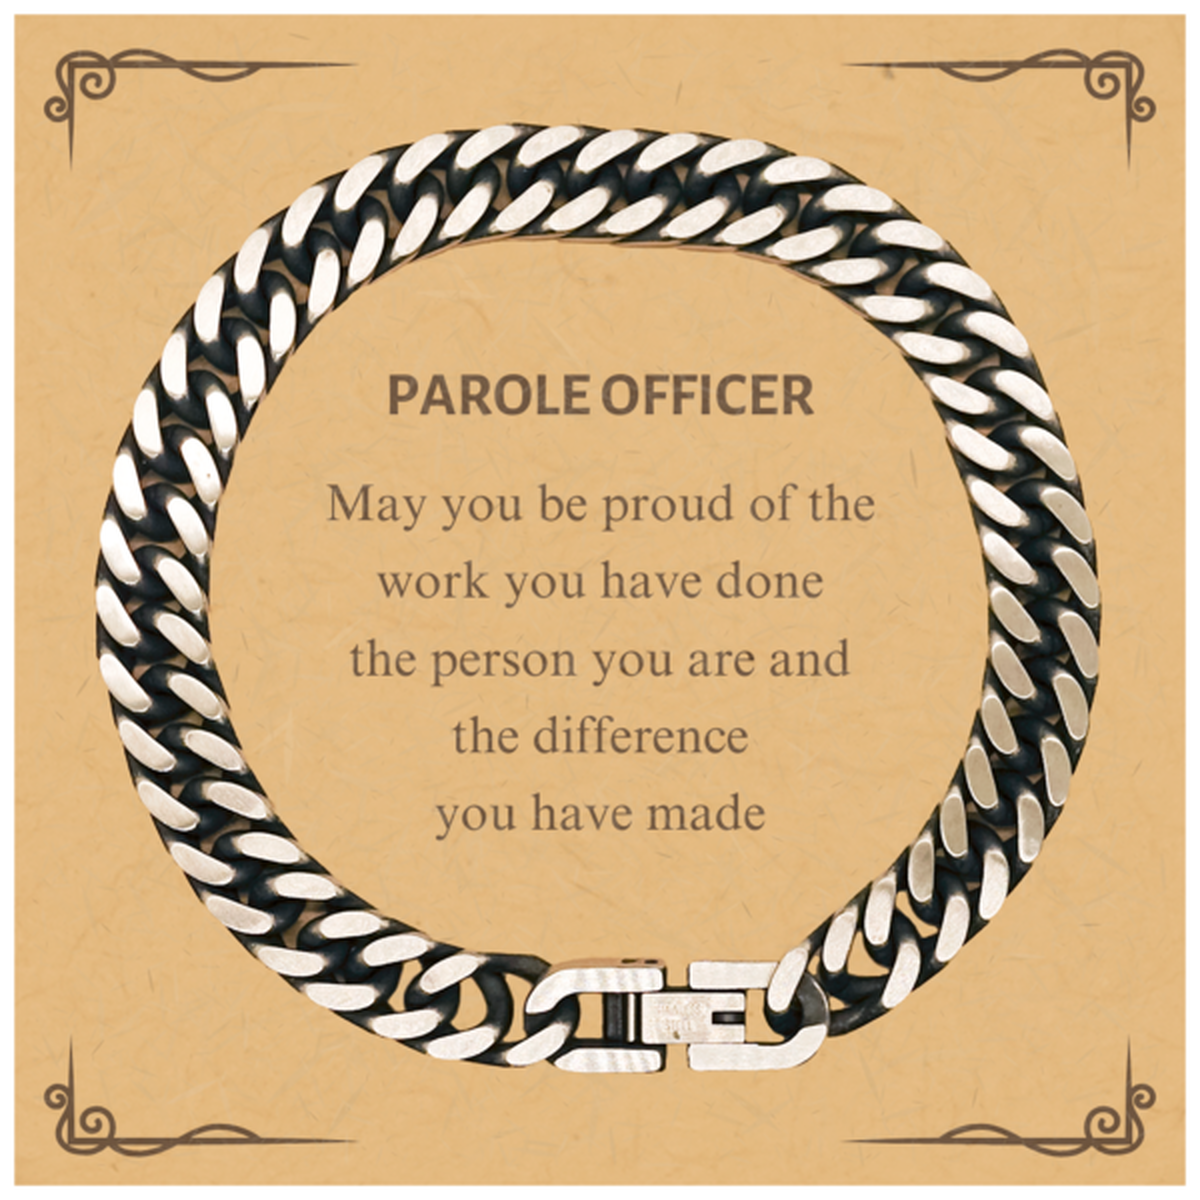 Parole Officer May you be proud of the work you have done, Retirement Parole Officer Cuban Link Chain Bracelet for Colleague Appreciation Gifts Amazing for Parole Officer